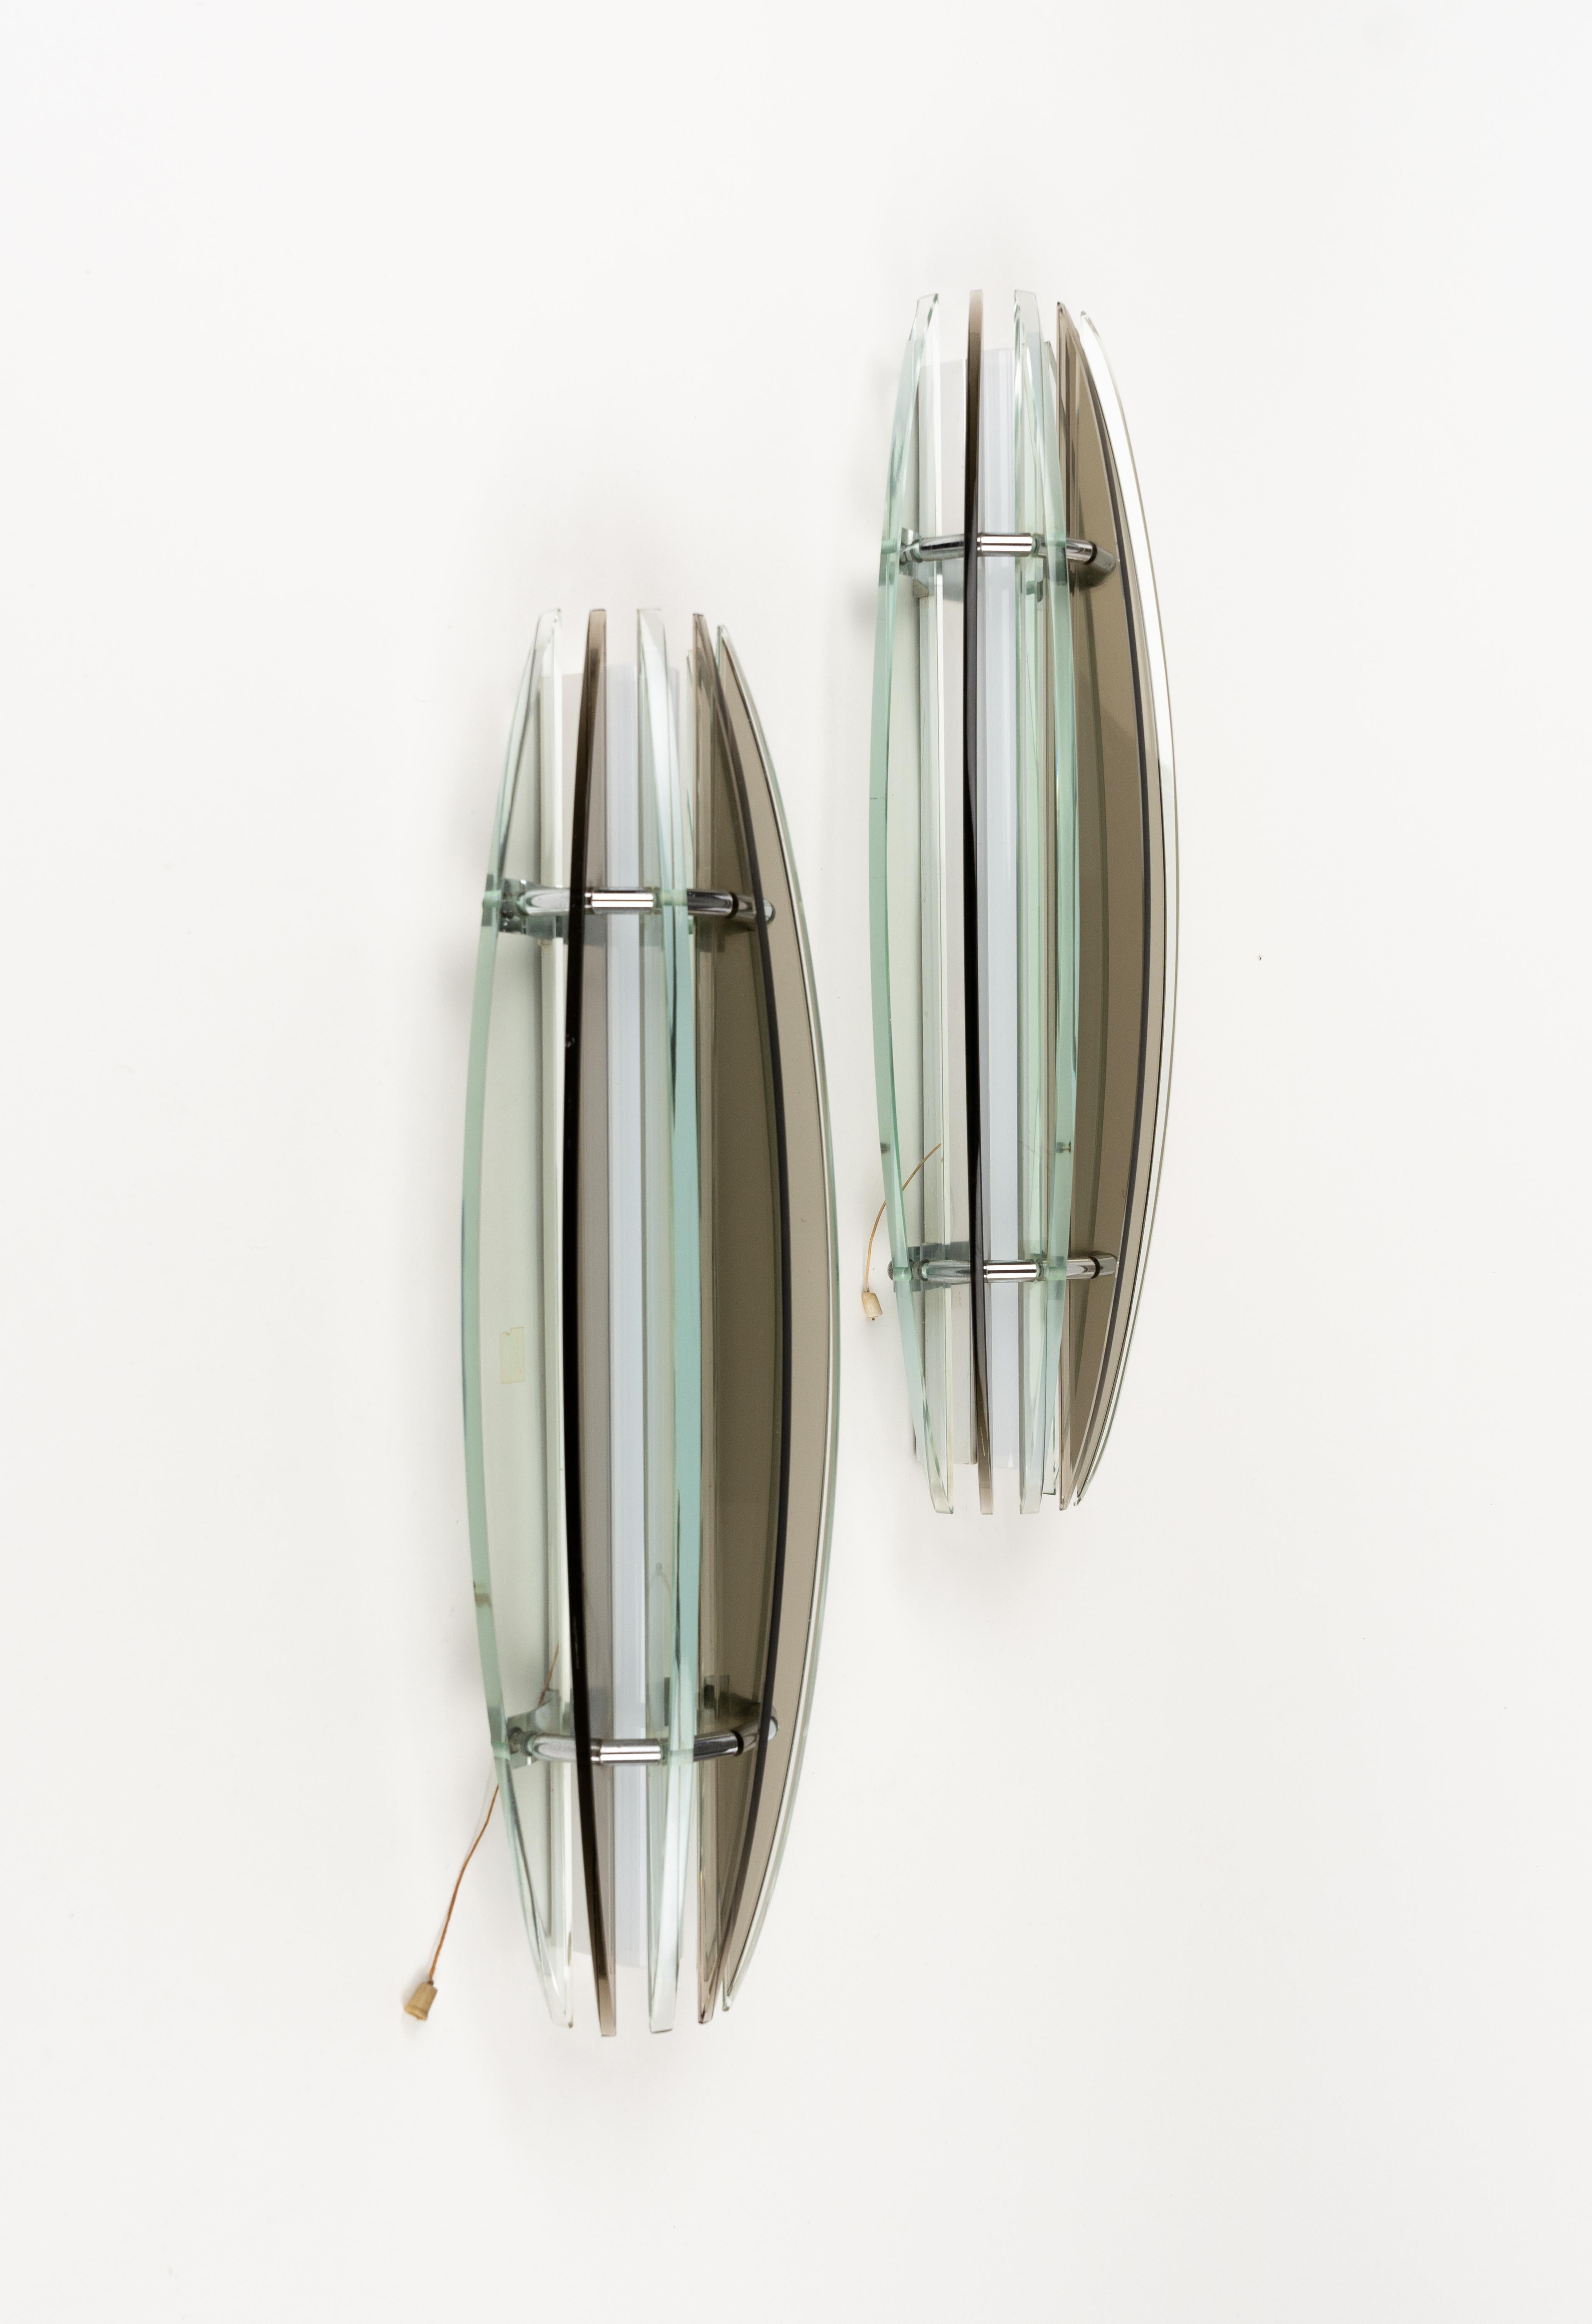 Midcentury Large Pair of Sconces in Colored Glass & Chrome by Veca, Italy, 1970s For Sale 2